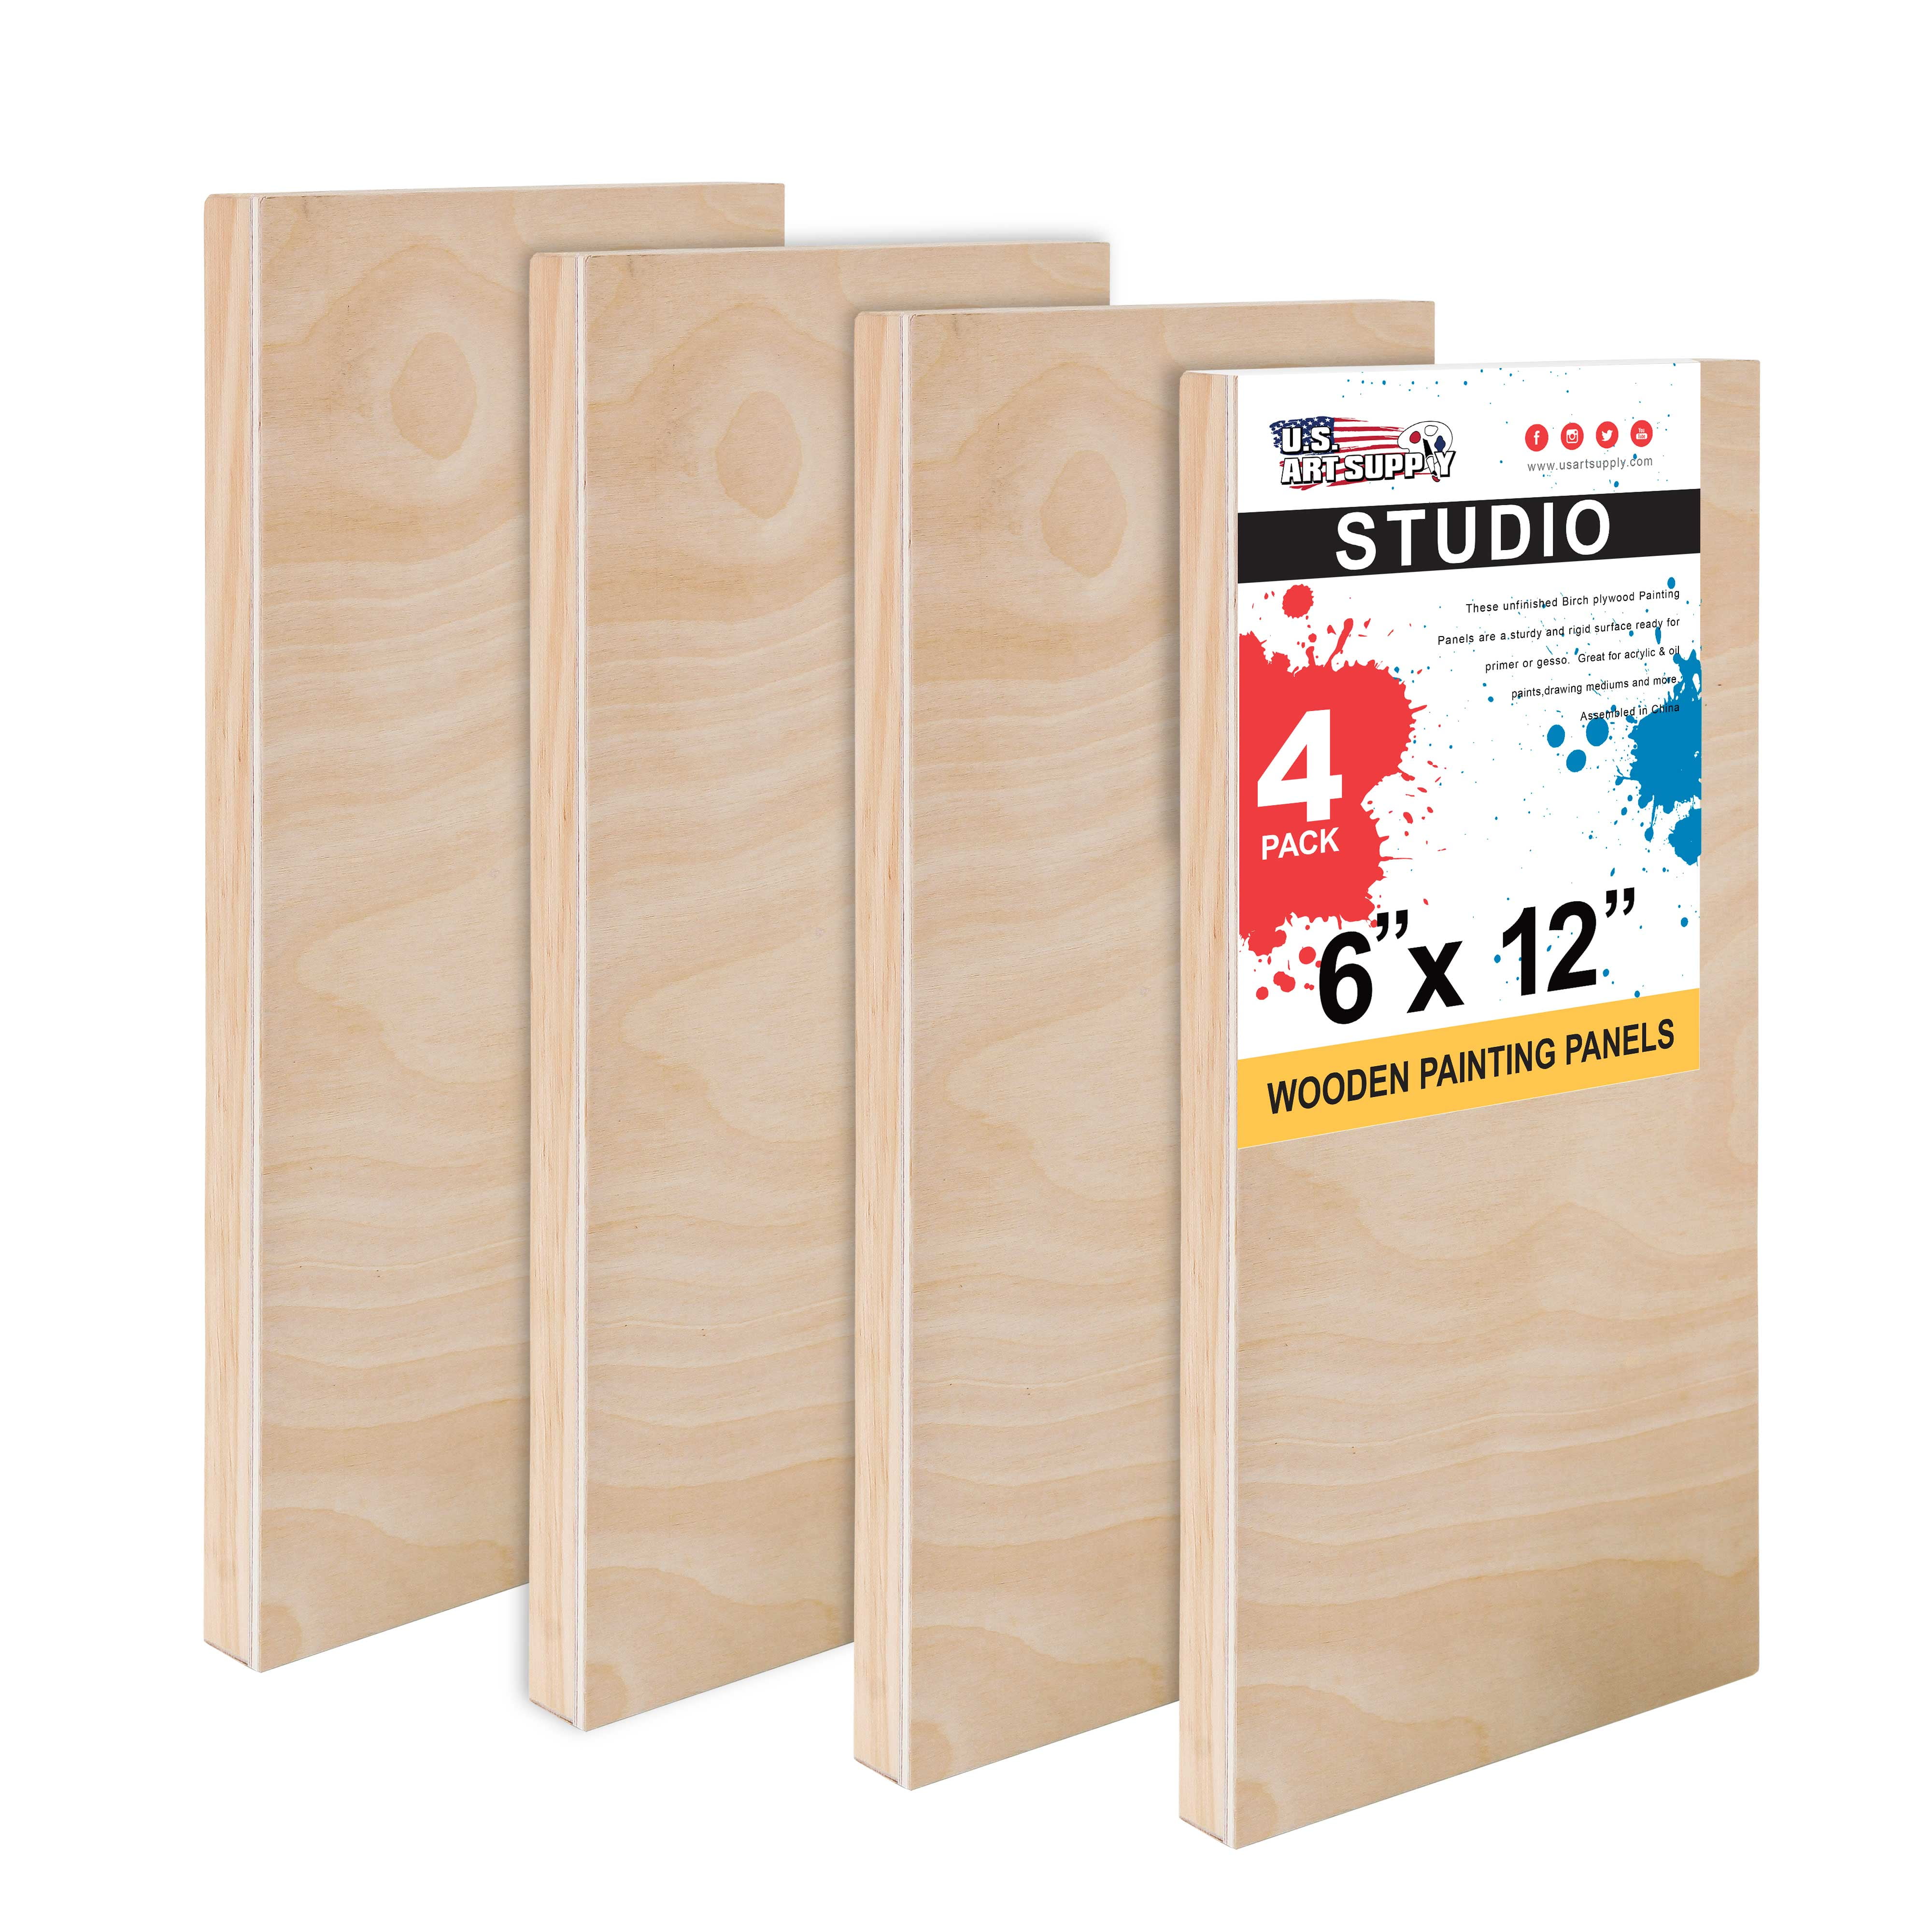 Acrylic Encaustic Oil U.S Studio 3/4 Deep Cradle Art Supply 4 x 4 Birch Wood Paint Pouring Panel Boards Watercolor - Artist Wooden Wall Canvases Painting Mixed-Media Craft Pack of 5 